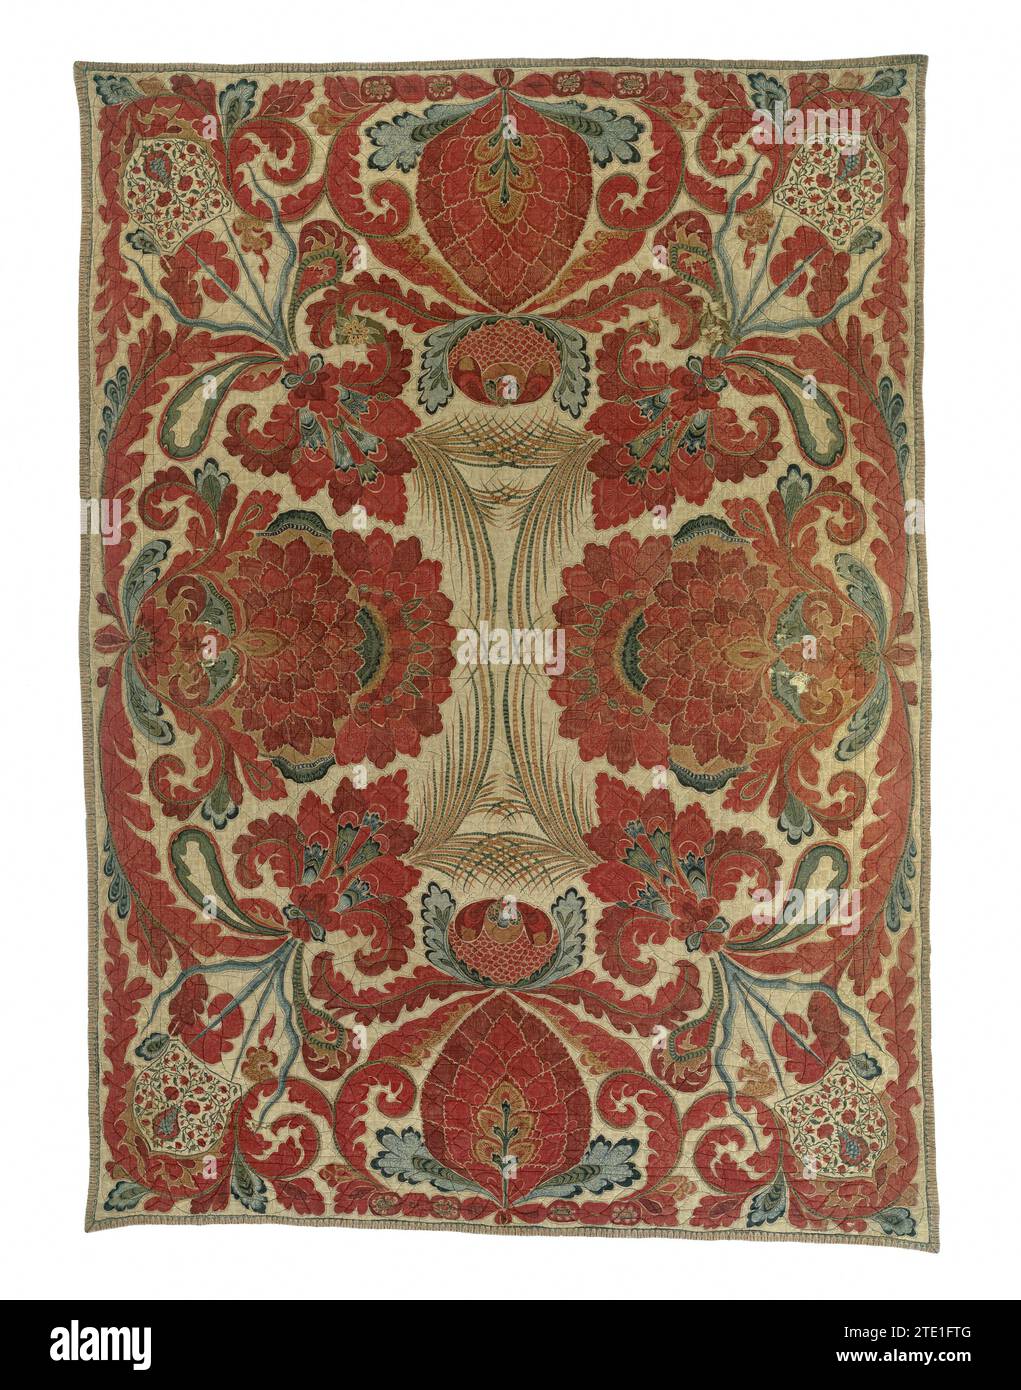 Blanket of sits, padded and lined with red cotton, c. 1700 - c. 1750 Blanket of sits. In the middle of the four sides, on a white stock, a large flower palm with red - two rush -hour and two fan -shaped - on a leaf rosette of blue and red volute libel, the red of which partly forms the edge, partly framed. In the corners, a smaller palm with the shape of a Fleur de Lys and Overhoeks placed, which hangs a coat of arms by means of a tied blue ribbon, which shows a flower vase on a white field with fine spiral vines, on which red carnations and pomegranates. The middle palms consist of scaly and Stock Photo